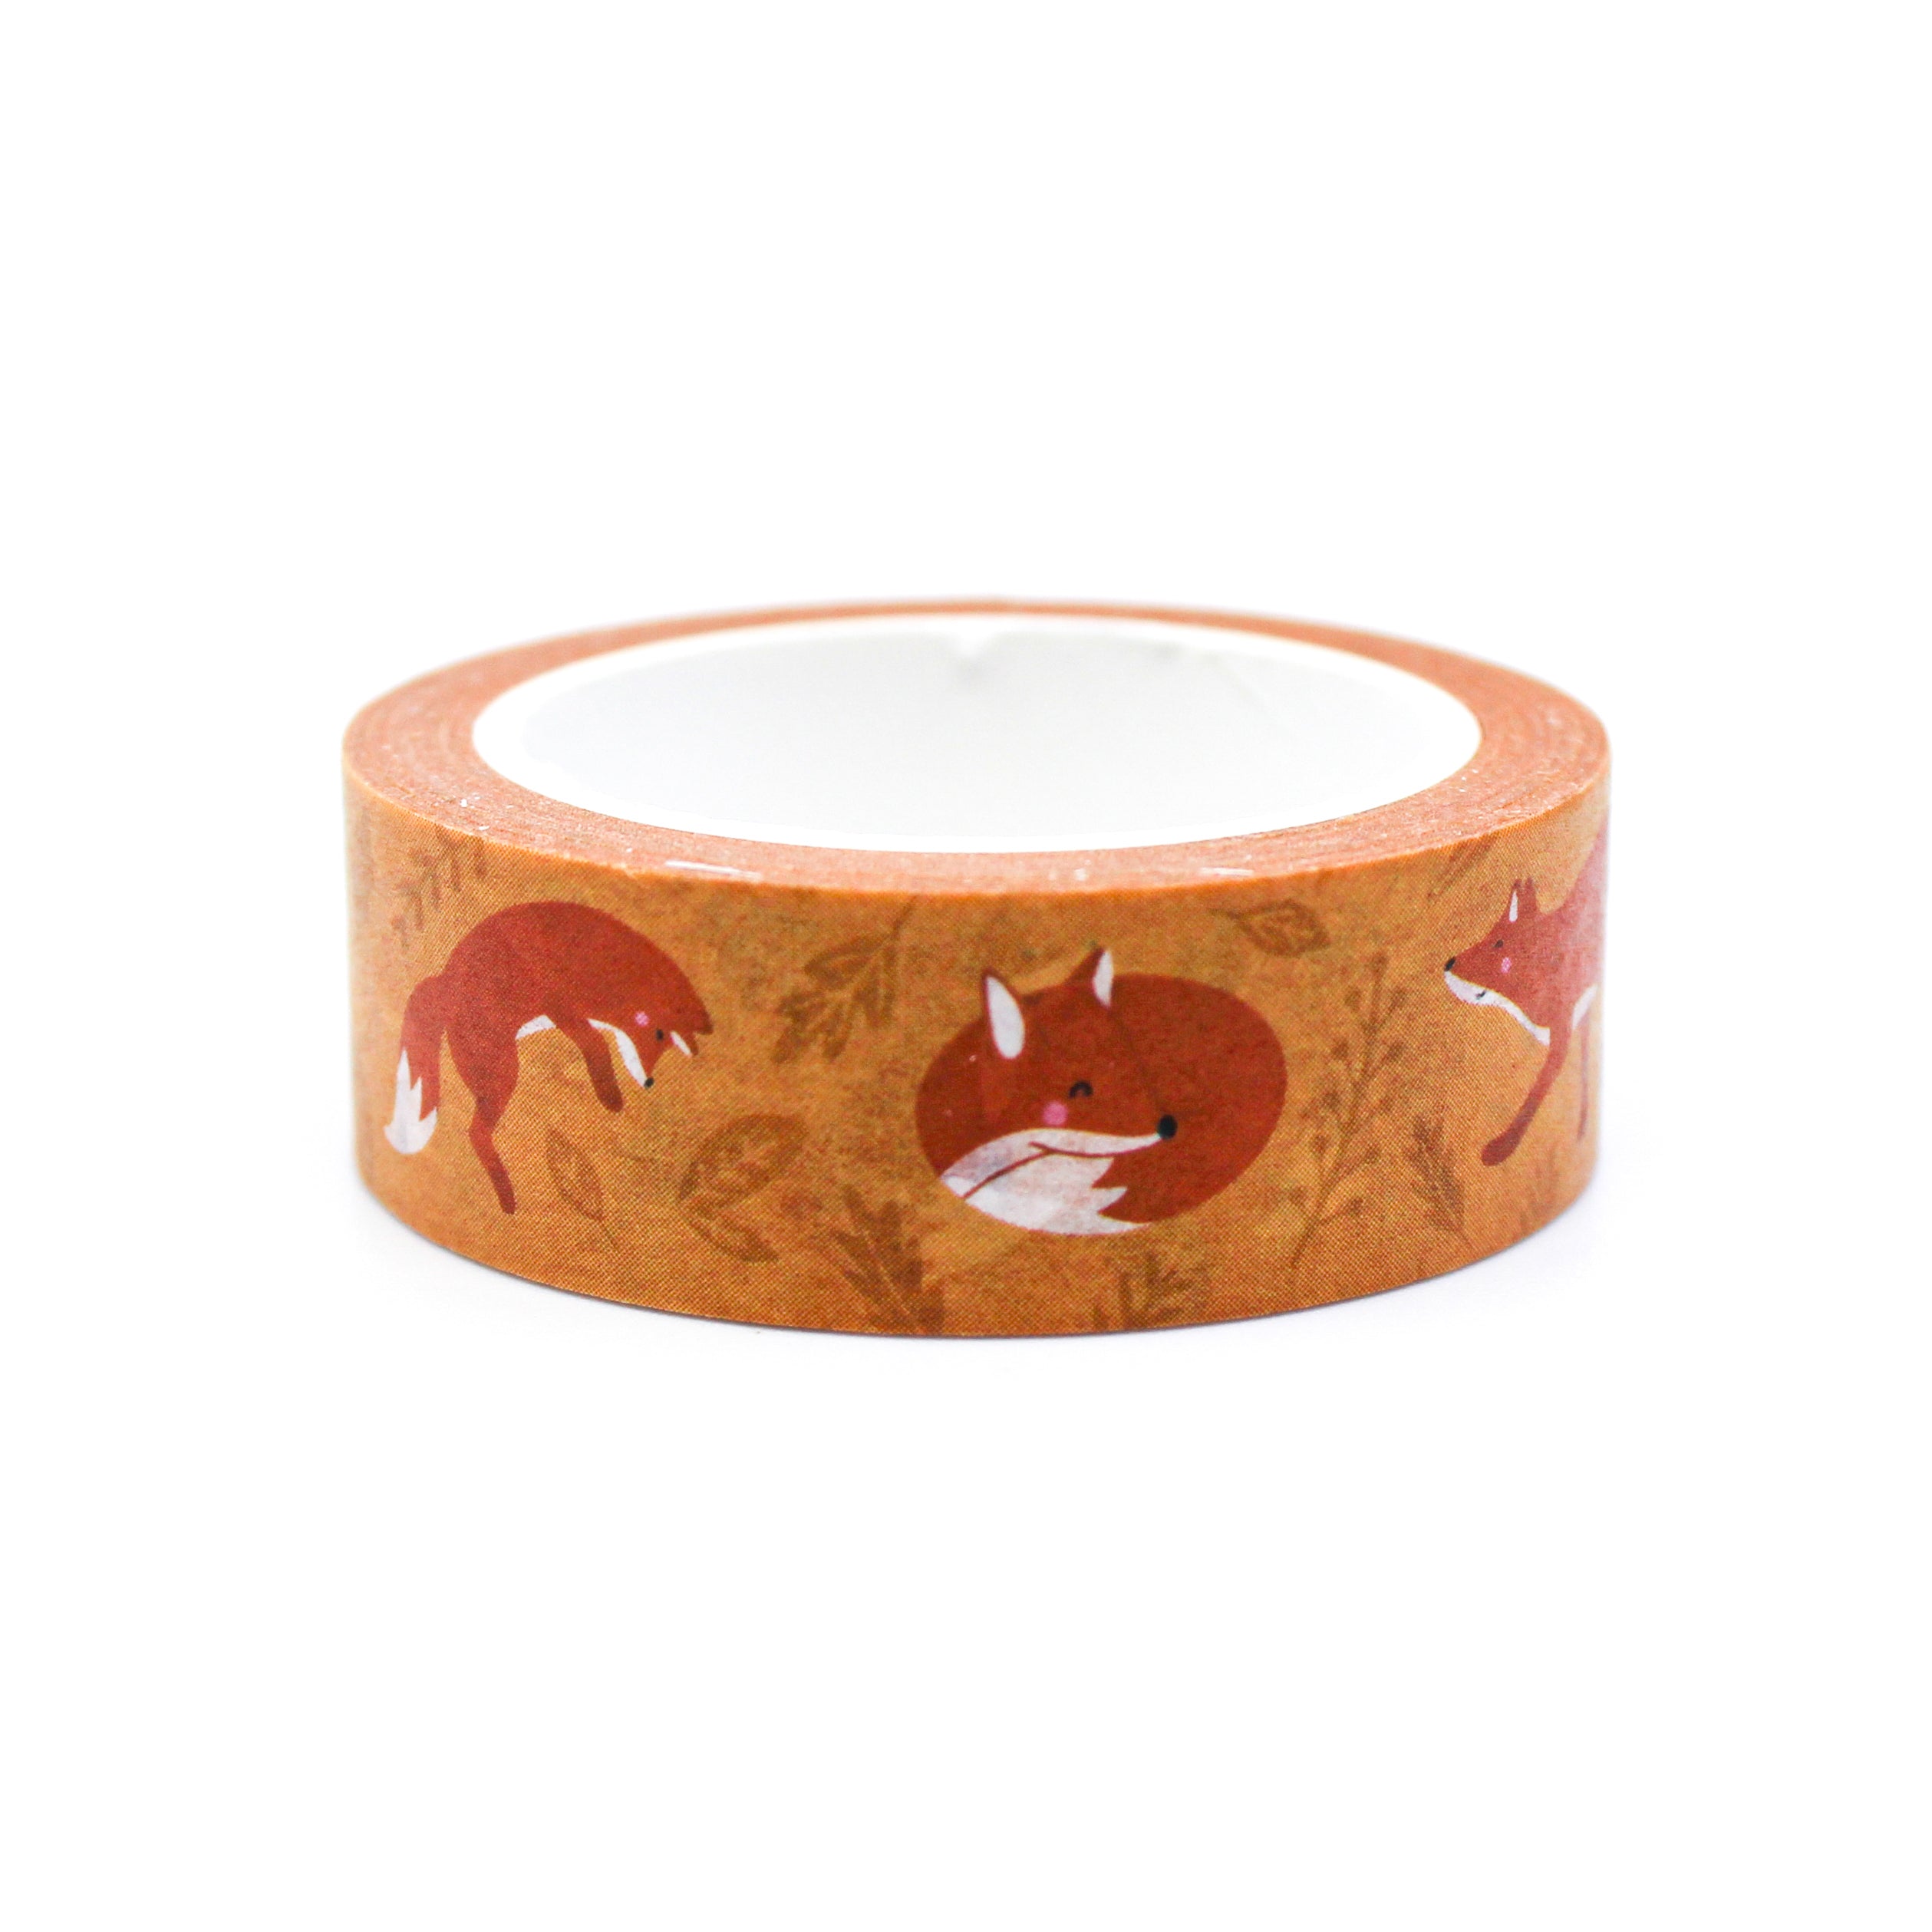  This is cute orange winter fox washi tape from BBB Supplies Craft Shop